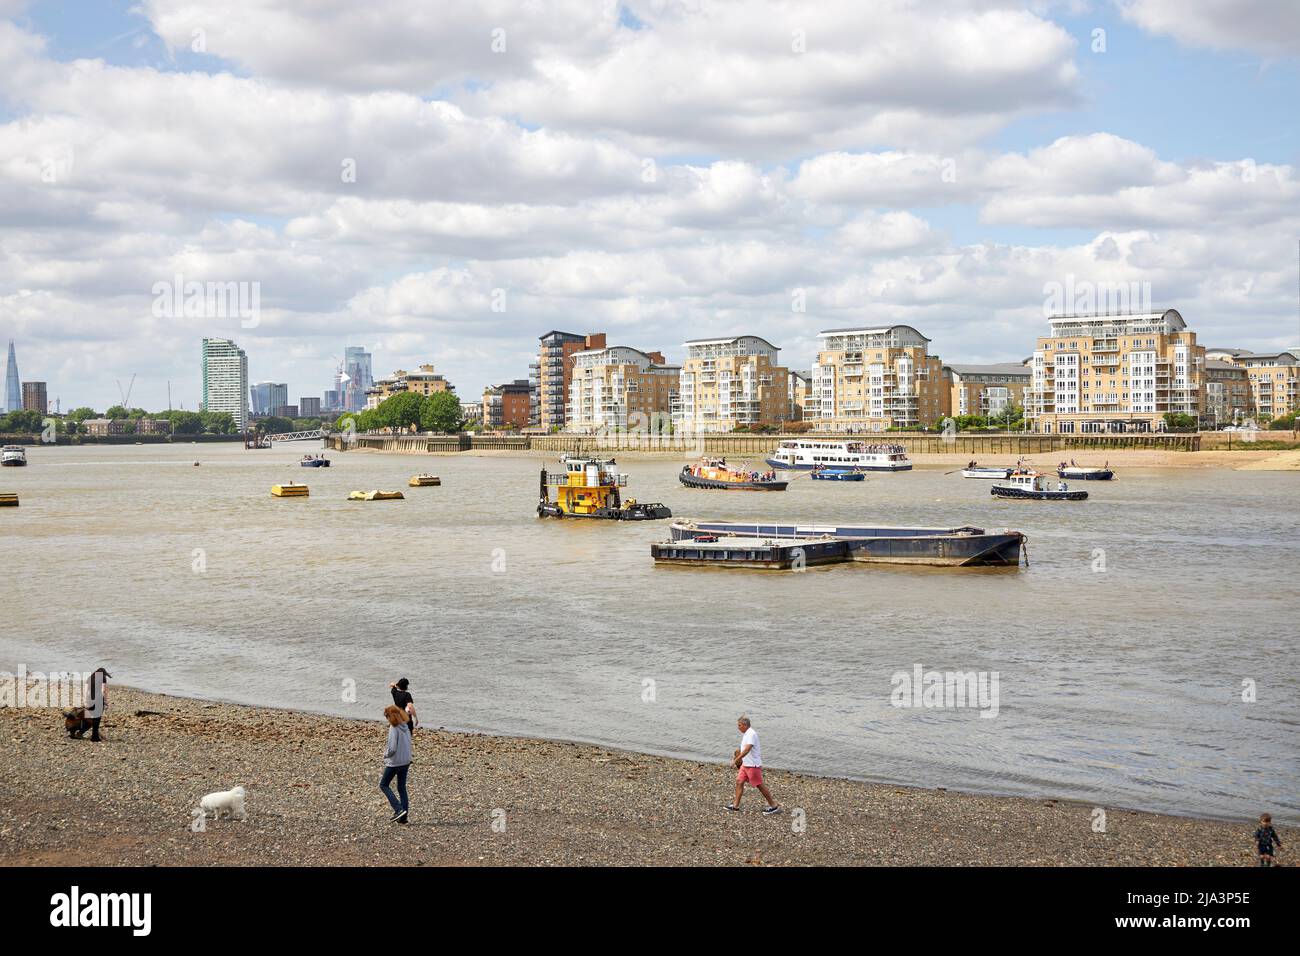 Isle of Dogs, London viewed from across the Thames at Greenwich at low tide, showing the beach. Stock Photo